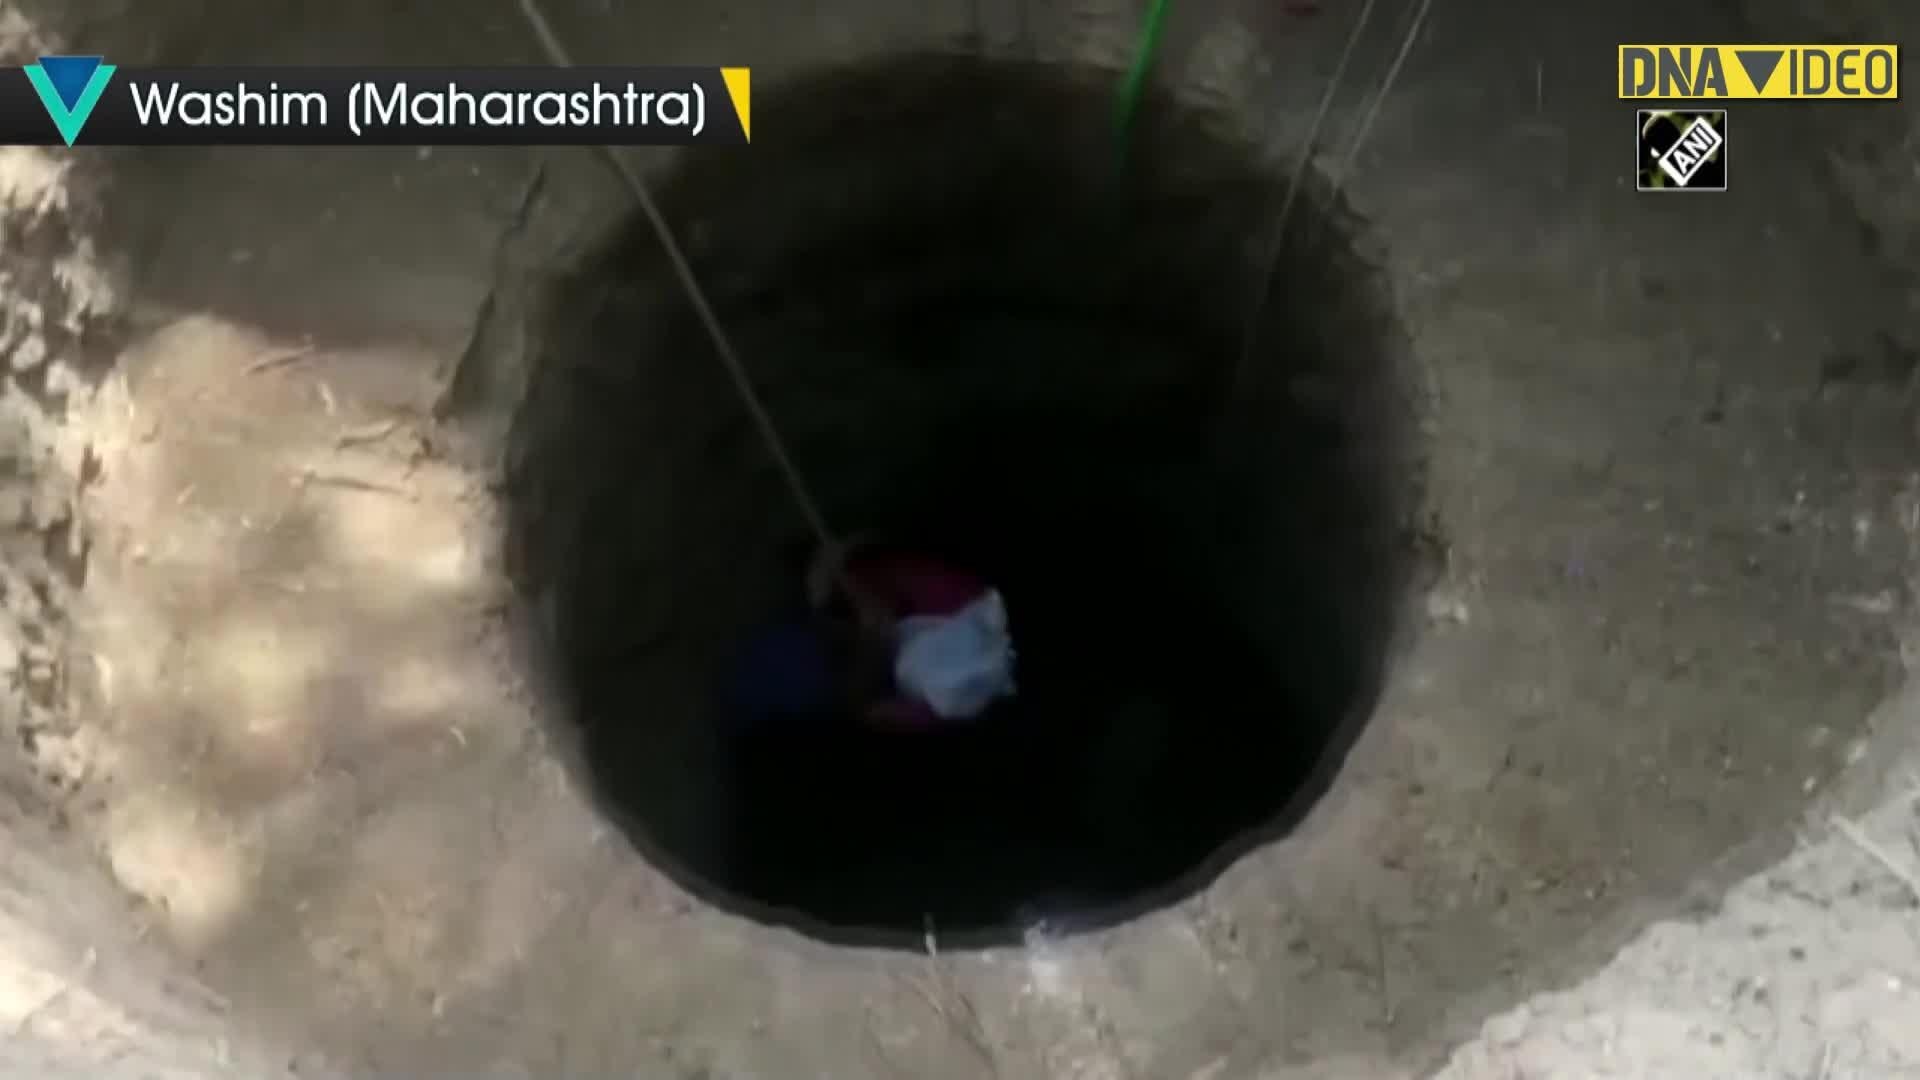 This couple makes best use of lockdown period, digs 25-feet deep well to solve water crisis - DNA India